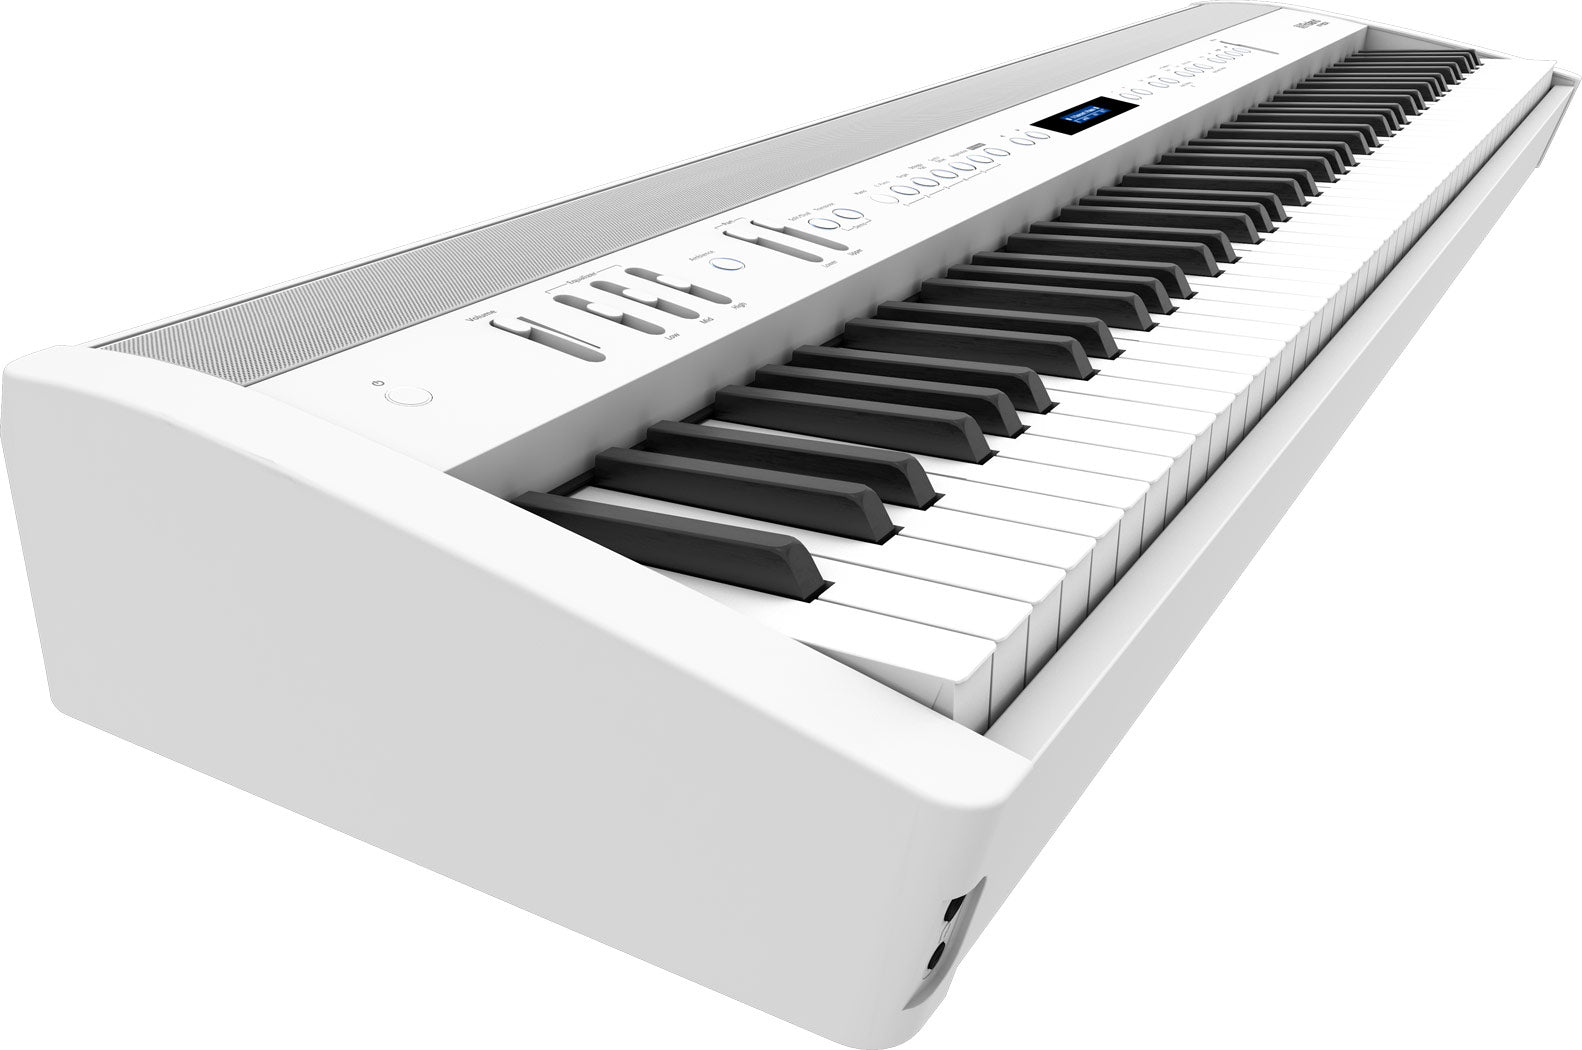 Roland FP-60X 88-key Digital Piano Musician Package with RH-5 Headphone and DP-10 Pedal - White (FP60X / FP 60X), ROLAND, DIGITAL PIANO, roland-digital-piano-fp-60x-wh, ZOSO MUSIC SDN BHD